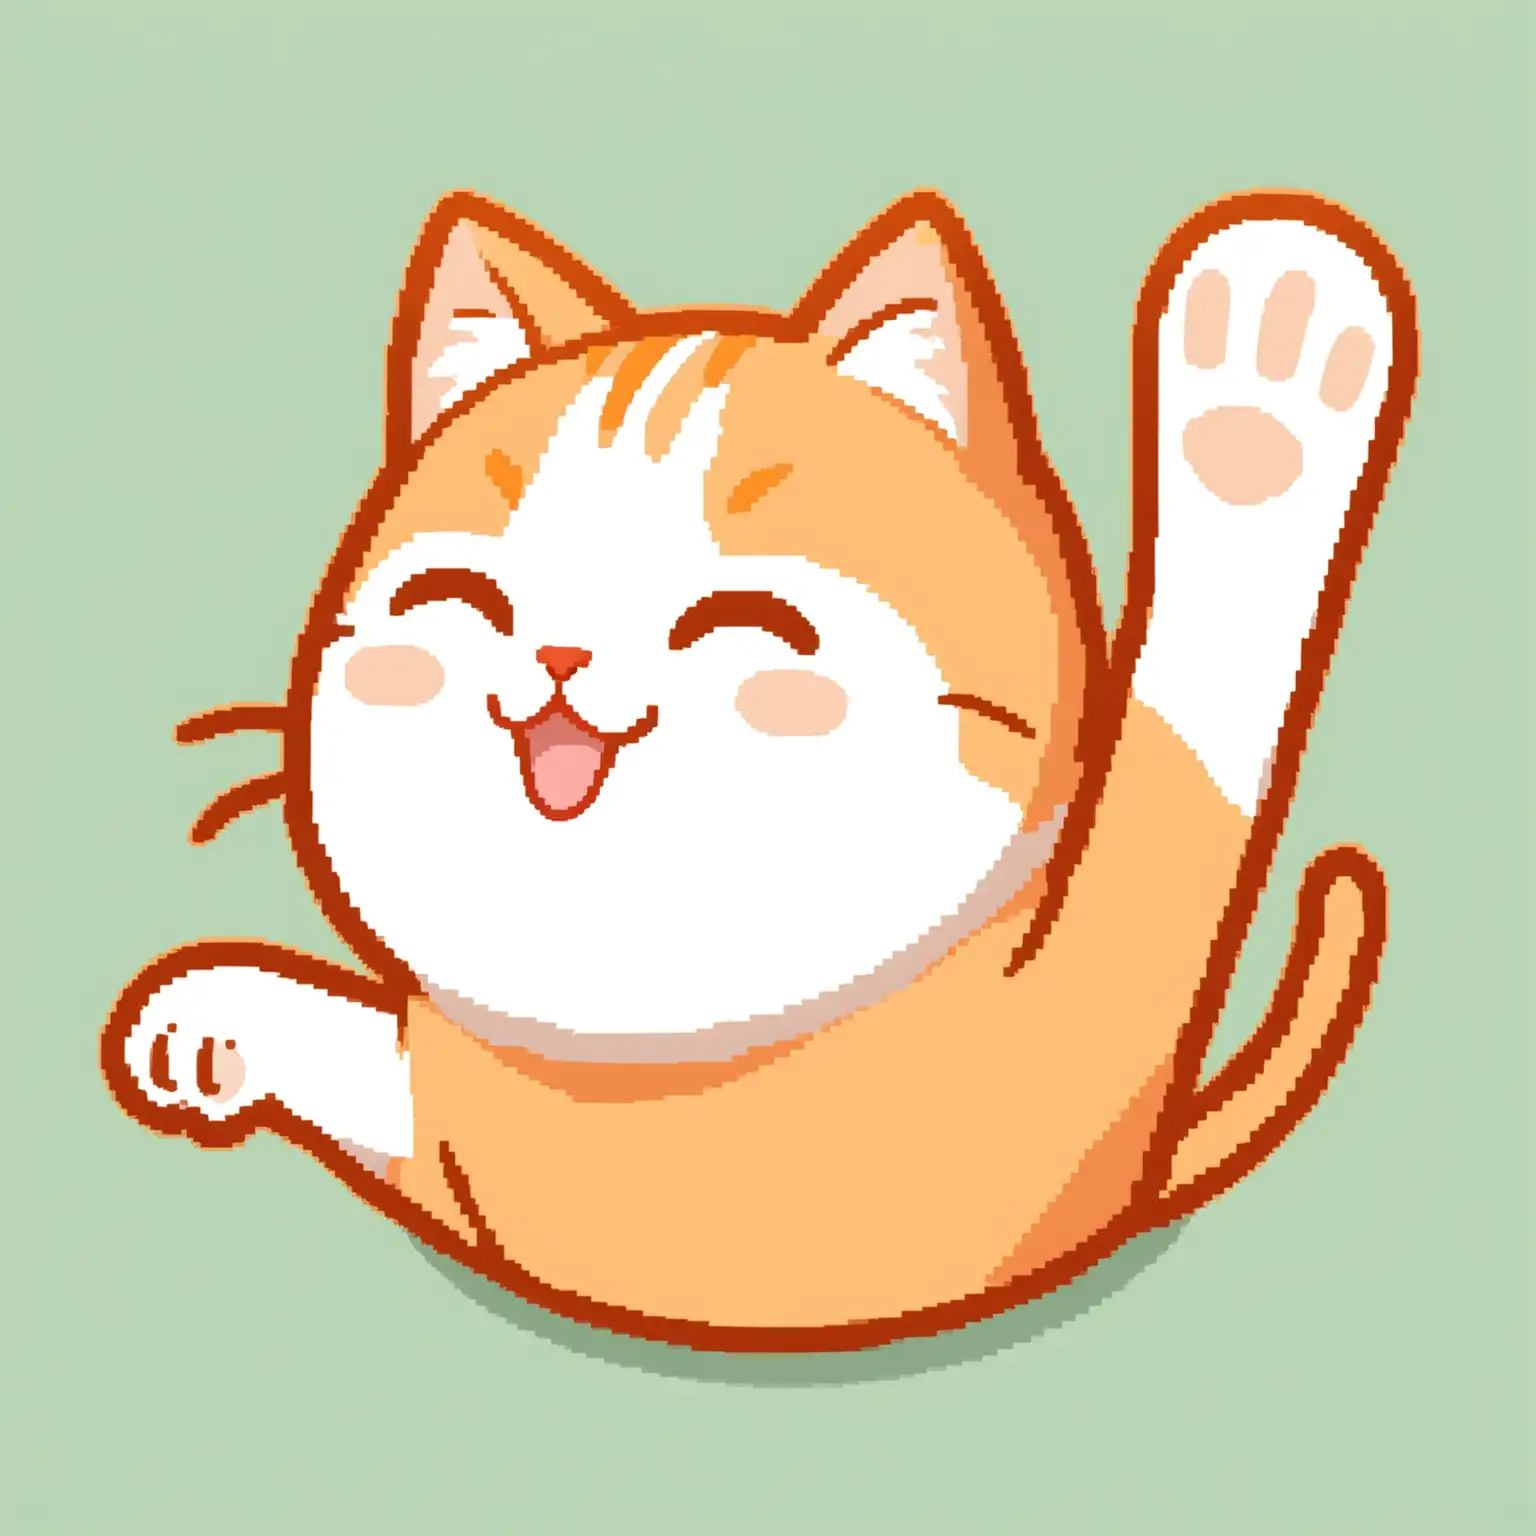 Friendly Orange and White Cat Waving in Emote Style